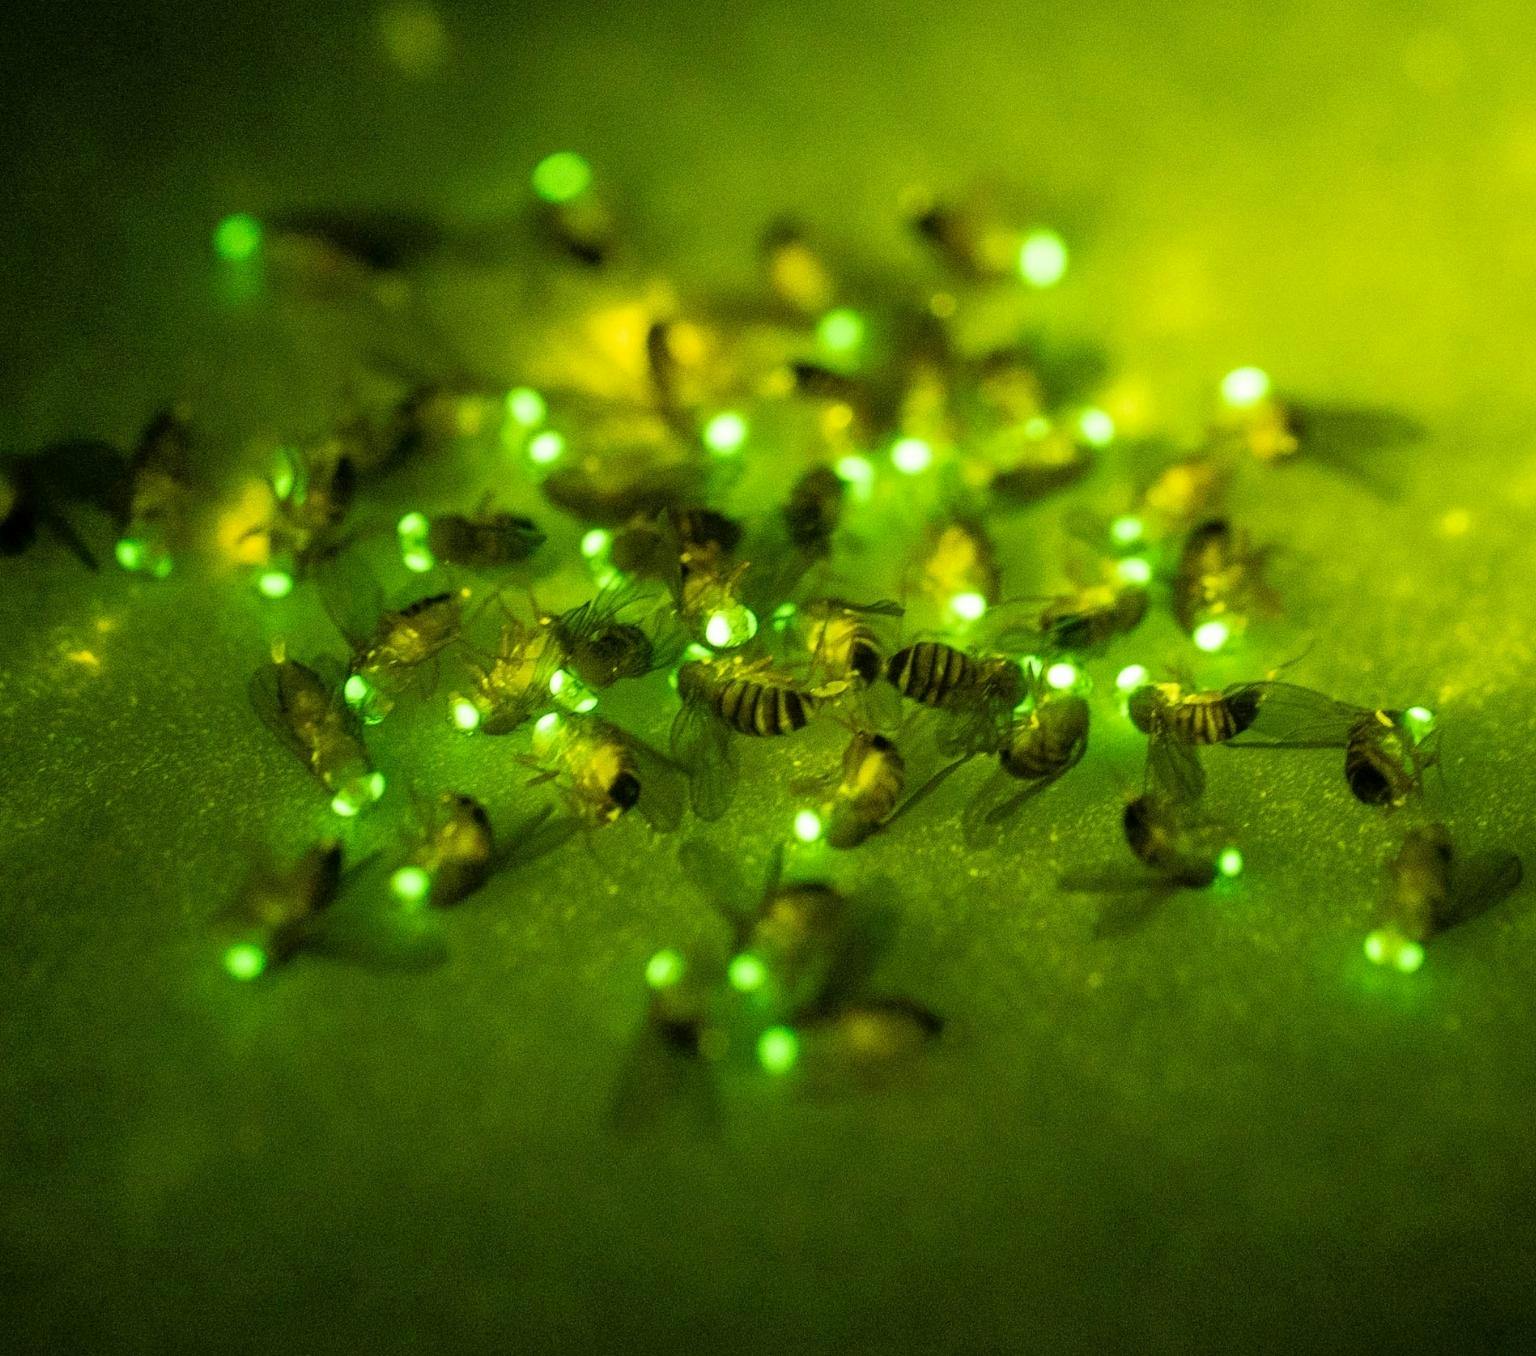 Tiny flies glow green and yellow under a microscope.